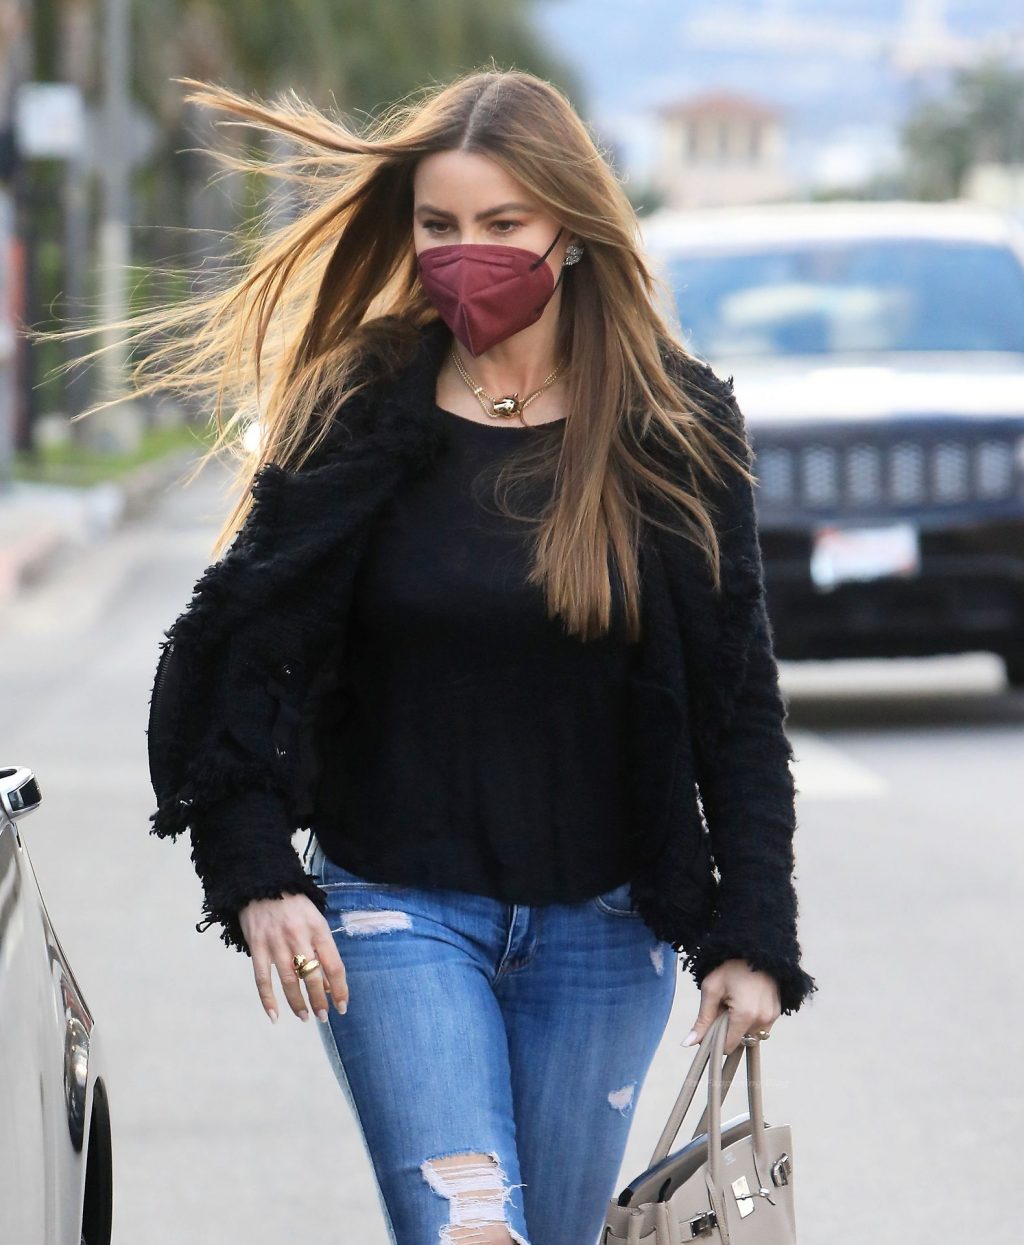 Sofia Vergara is Still Flying High After Judge Rules in Her Favor (24 Photos)